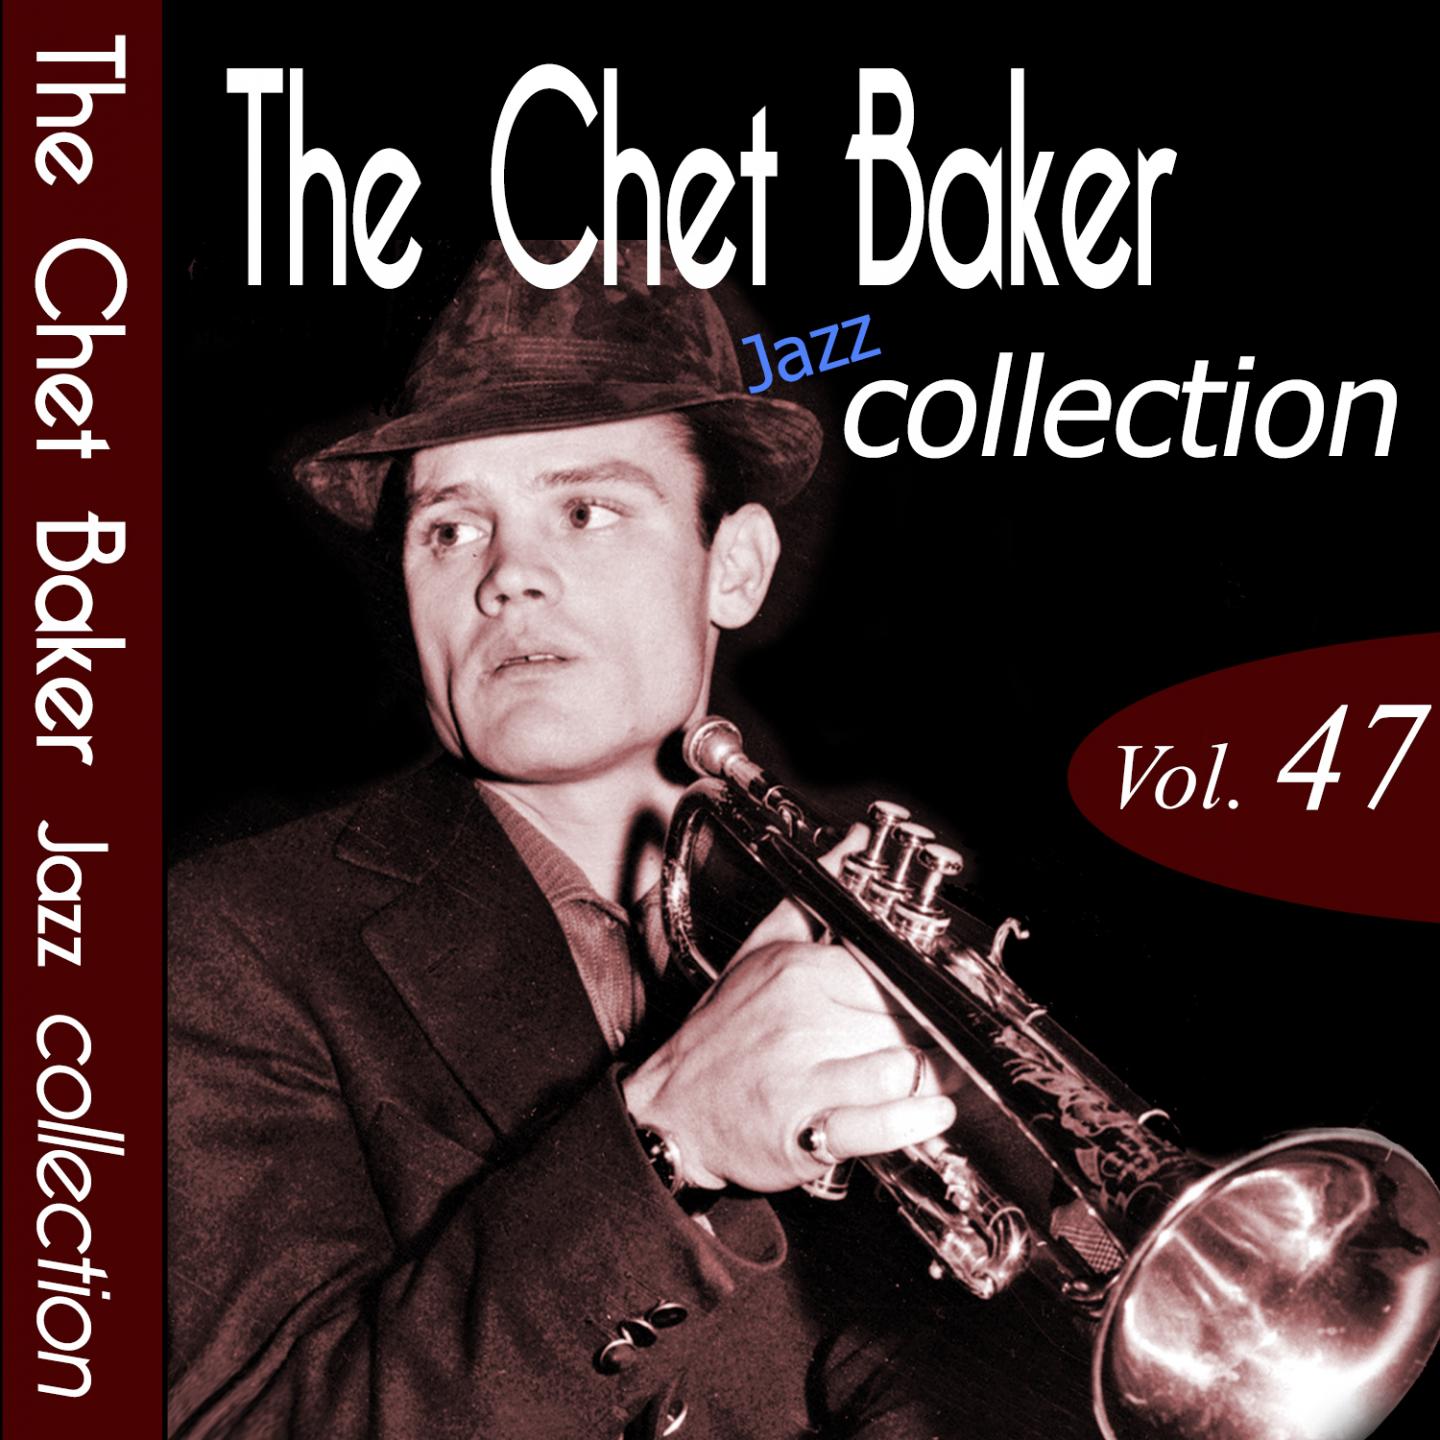 The Chet Baker Jazz Collection, Vol. 47 (Remastered)